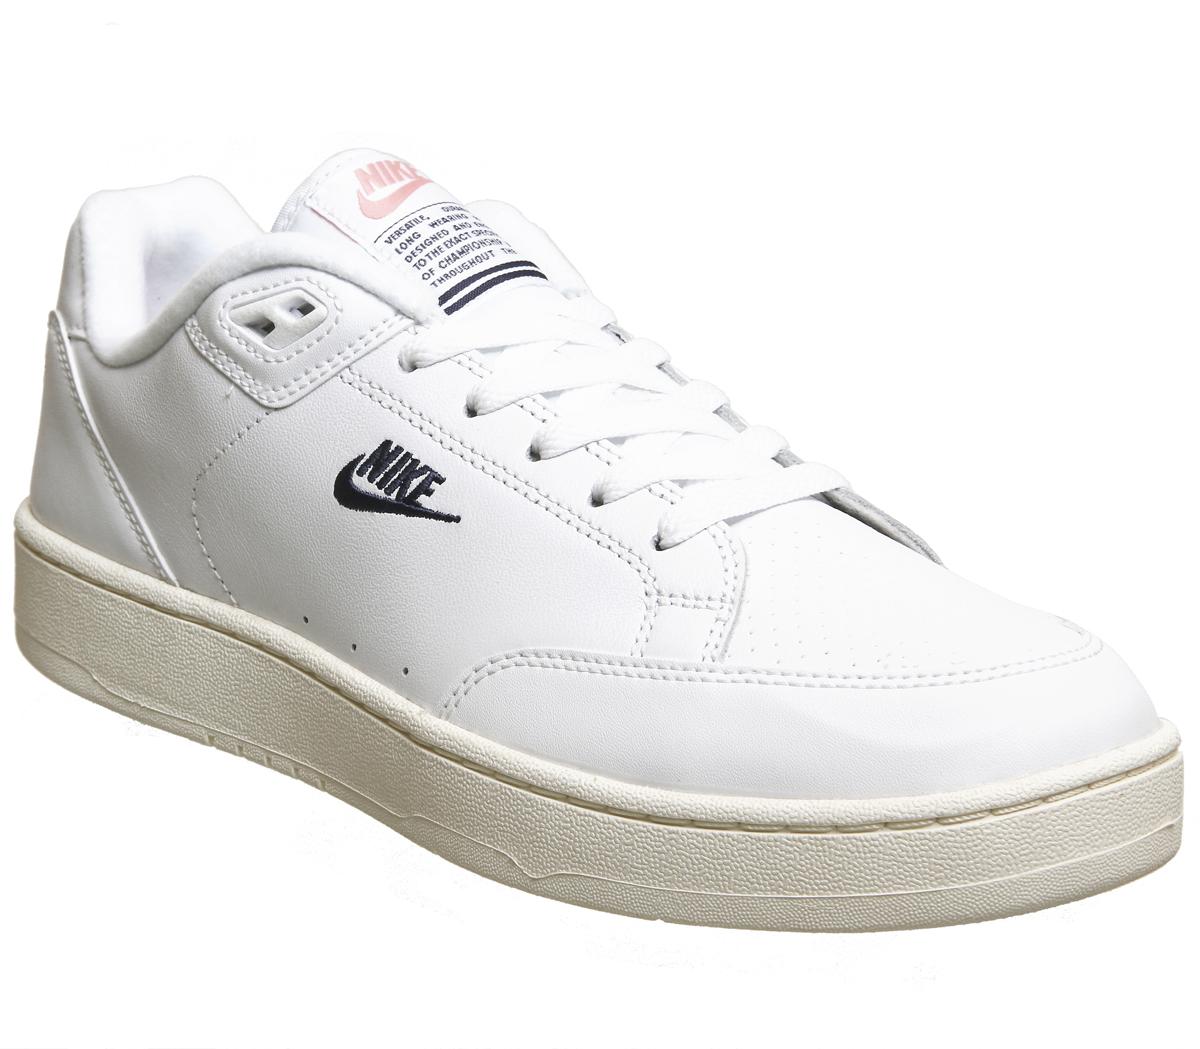 Nike Grandstand 2 White Navy - His trainers